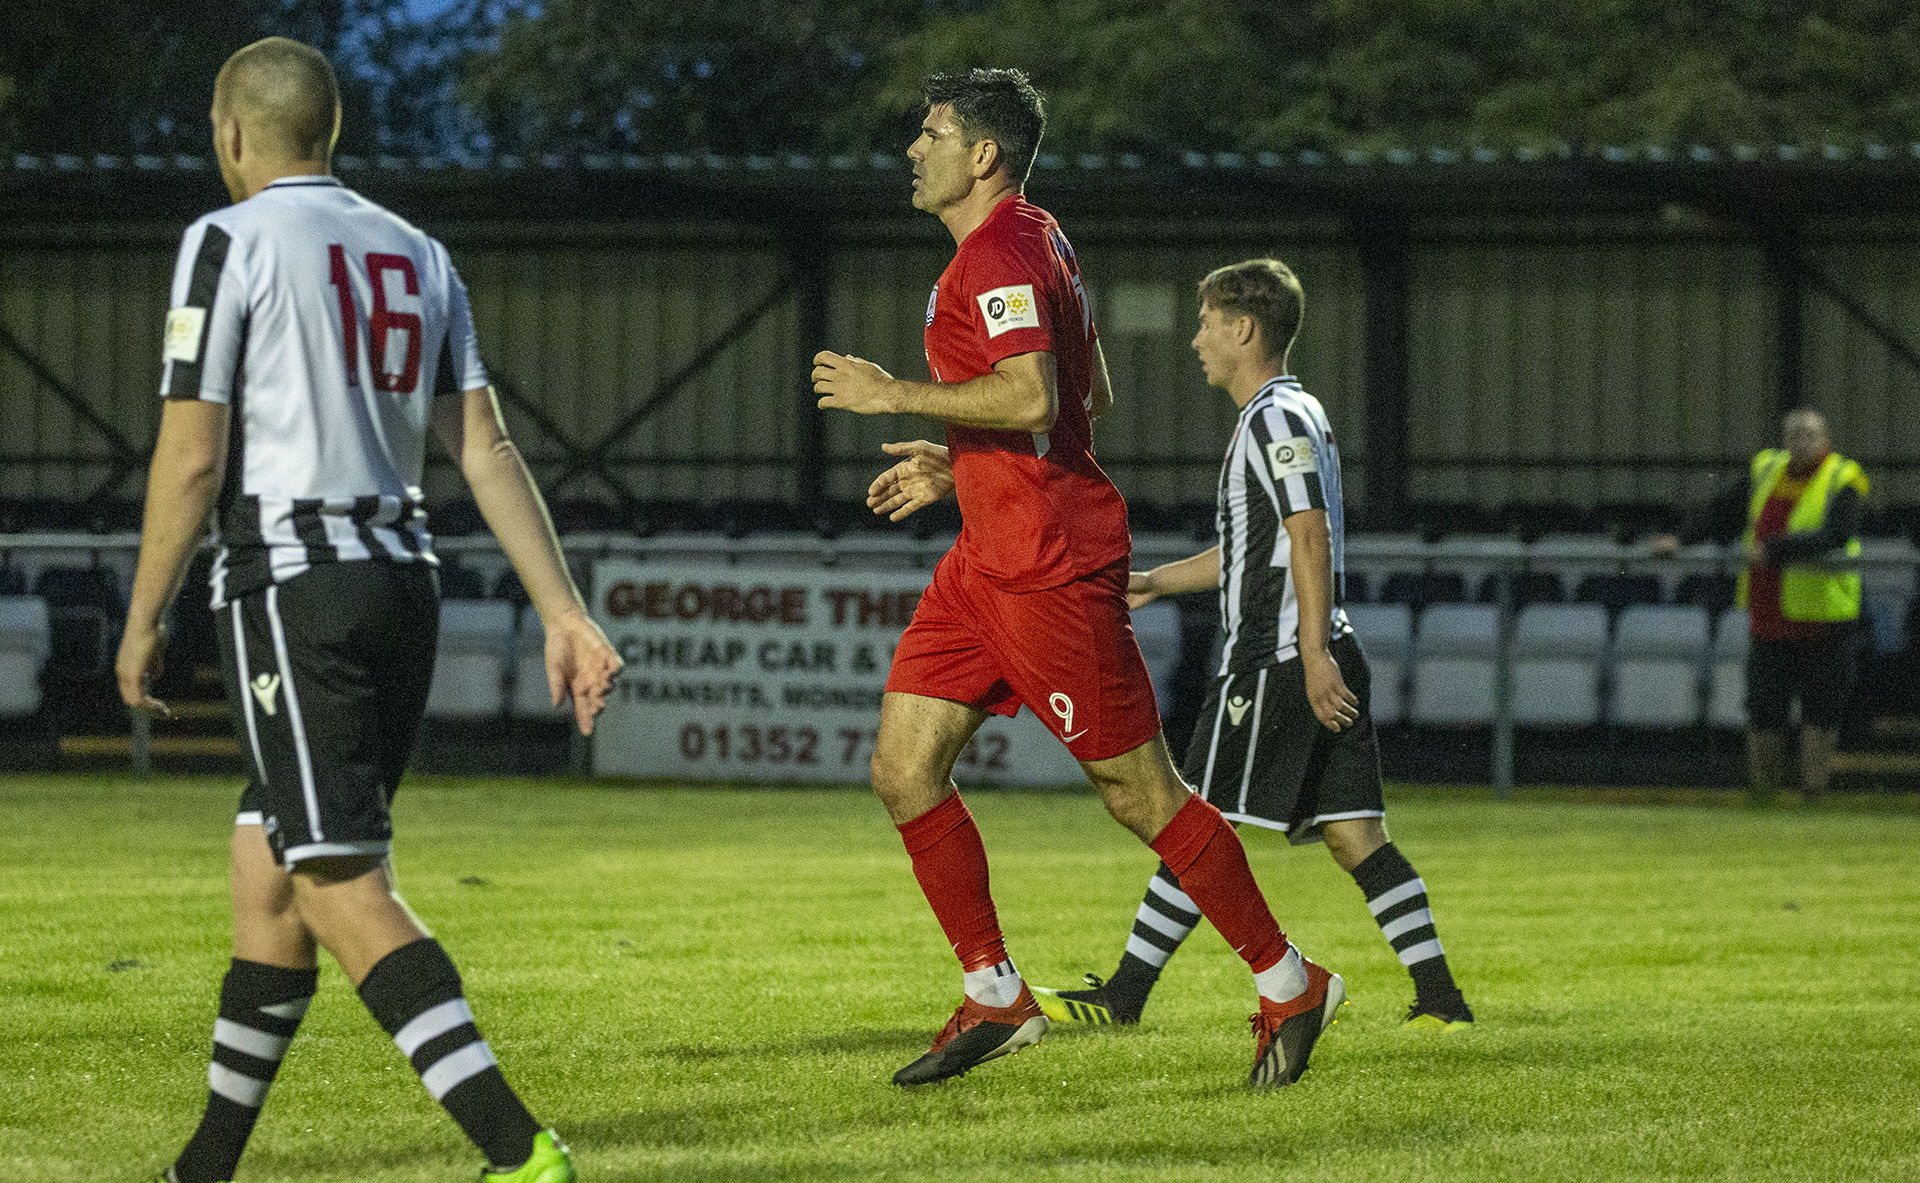 Mike Wilde celebrates opening the scoring just before half time | © NCM Media